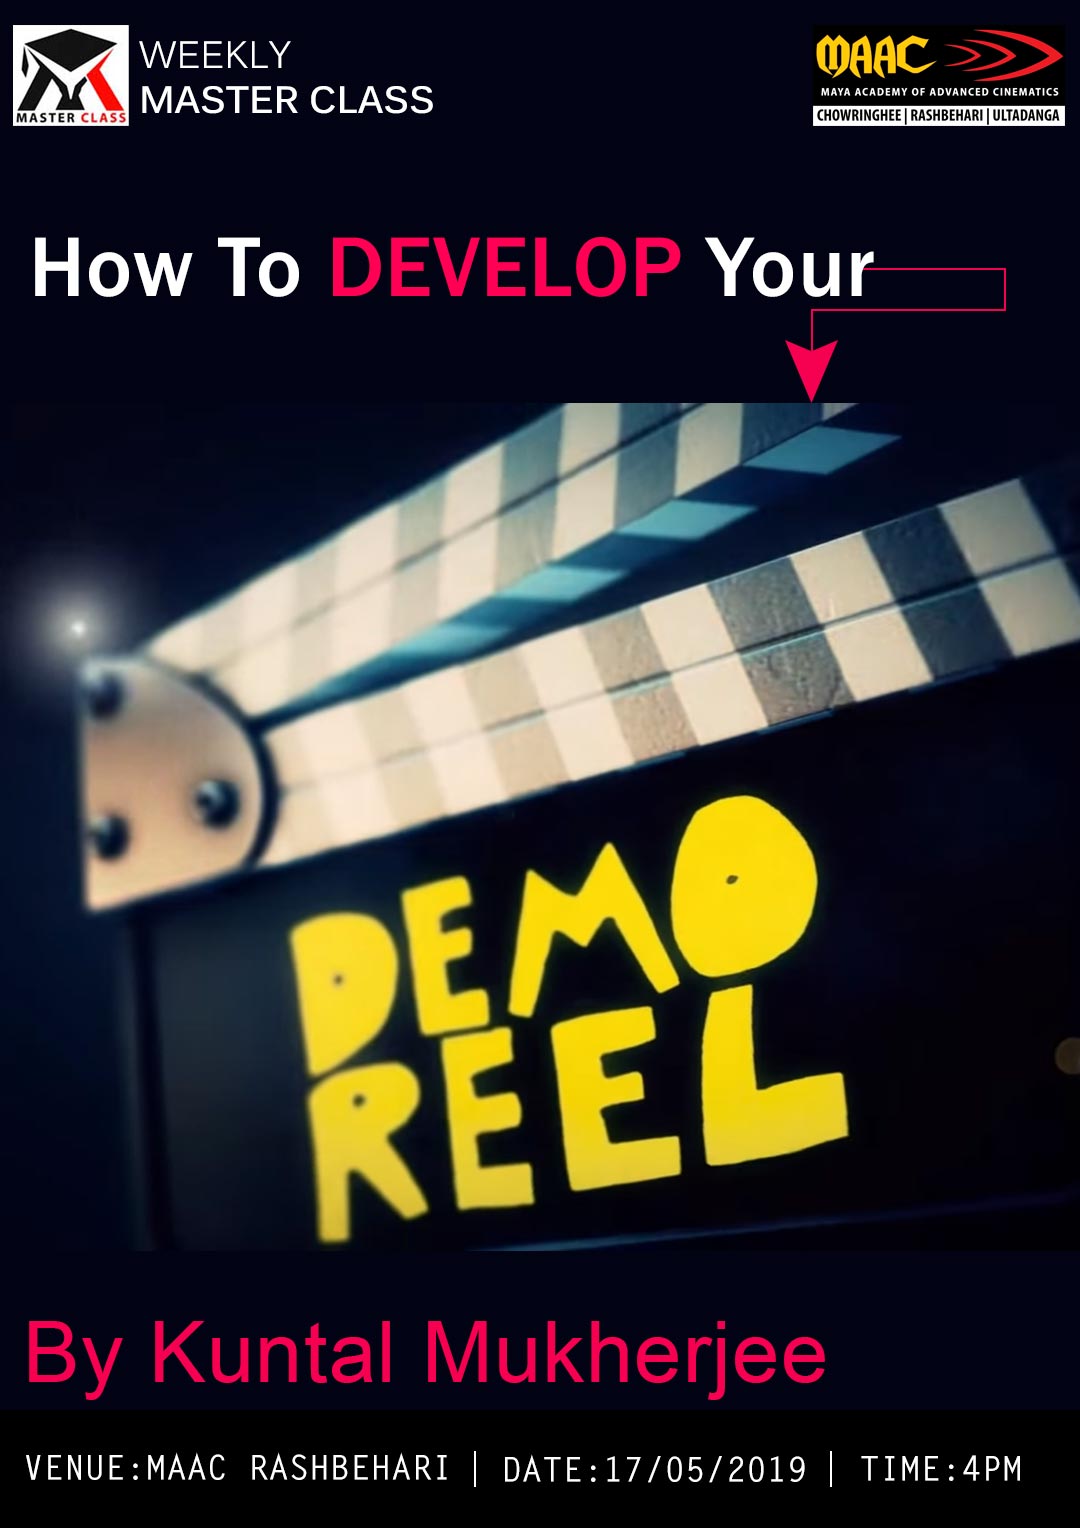 Weekly Master Class on How to Develop Good Demoreel